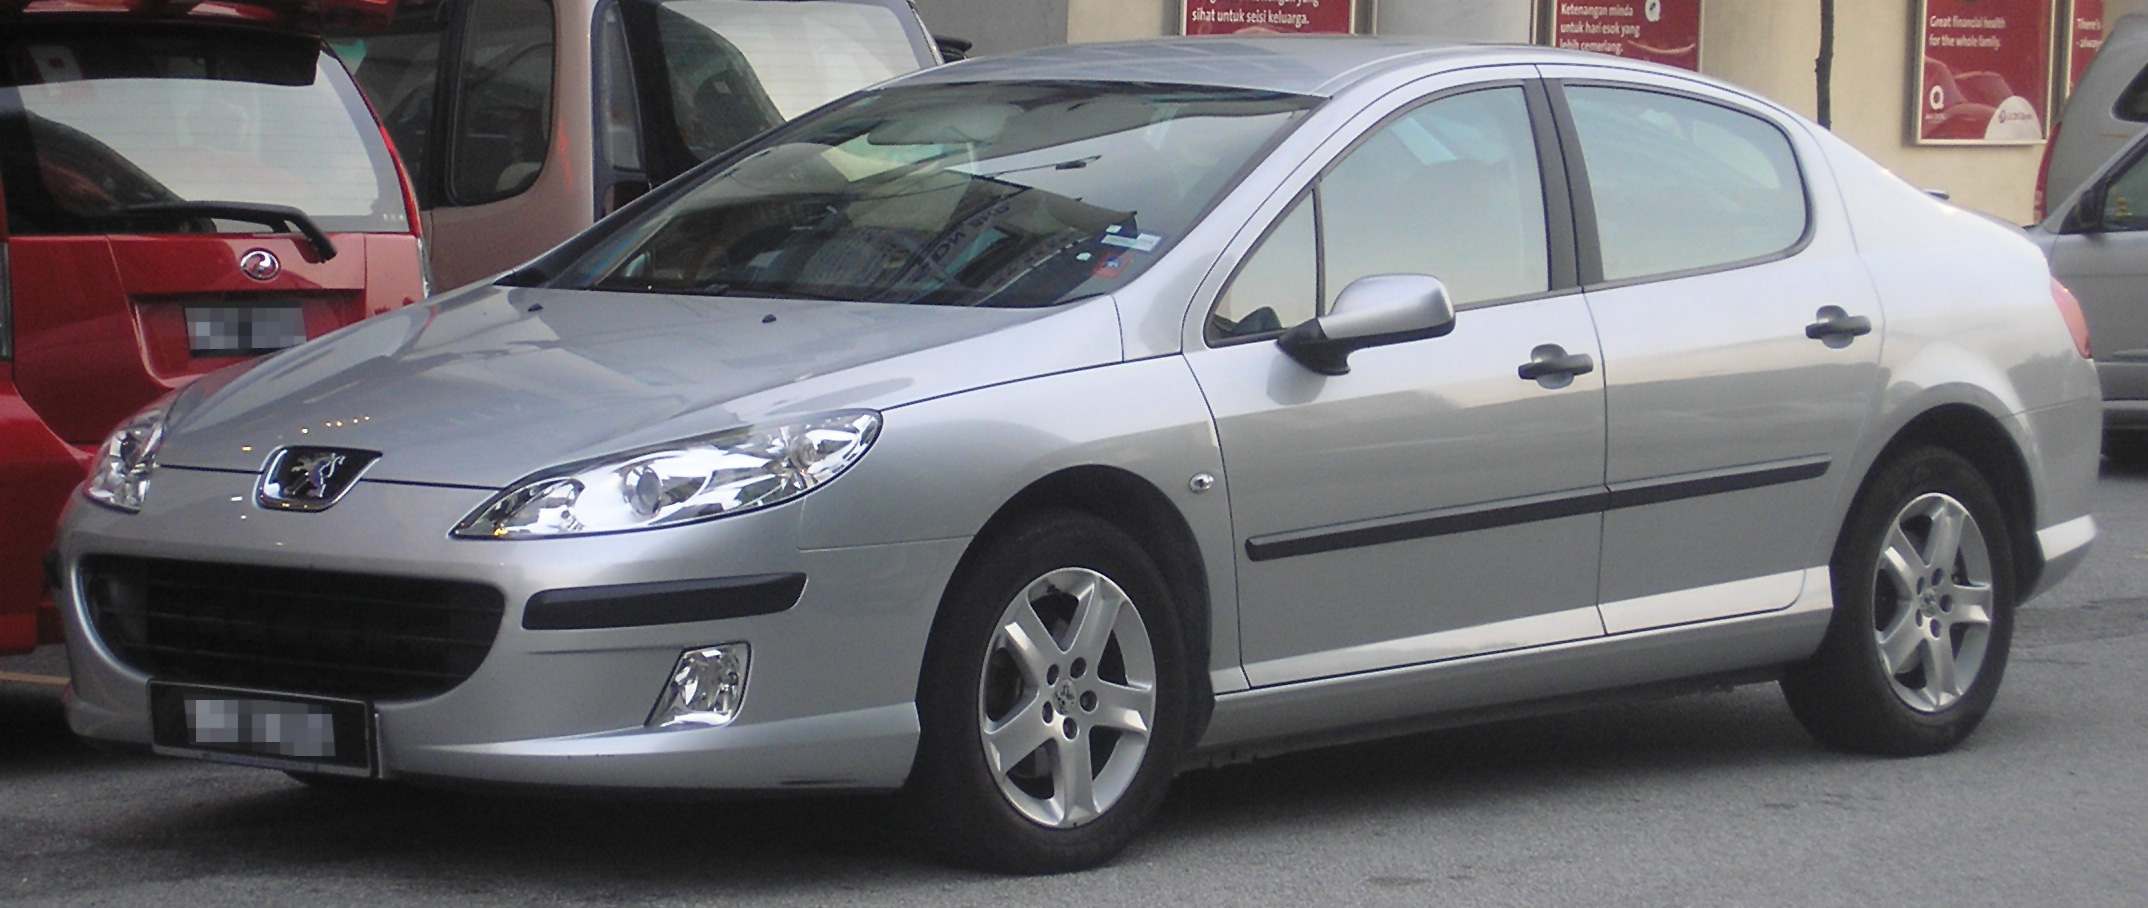 Fichiers Tuning Haute Qualité Peugeot 407 2.0 HDI 128hp